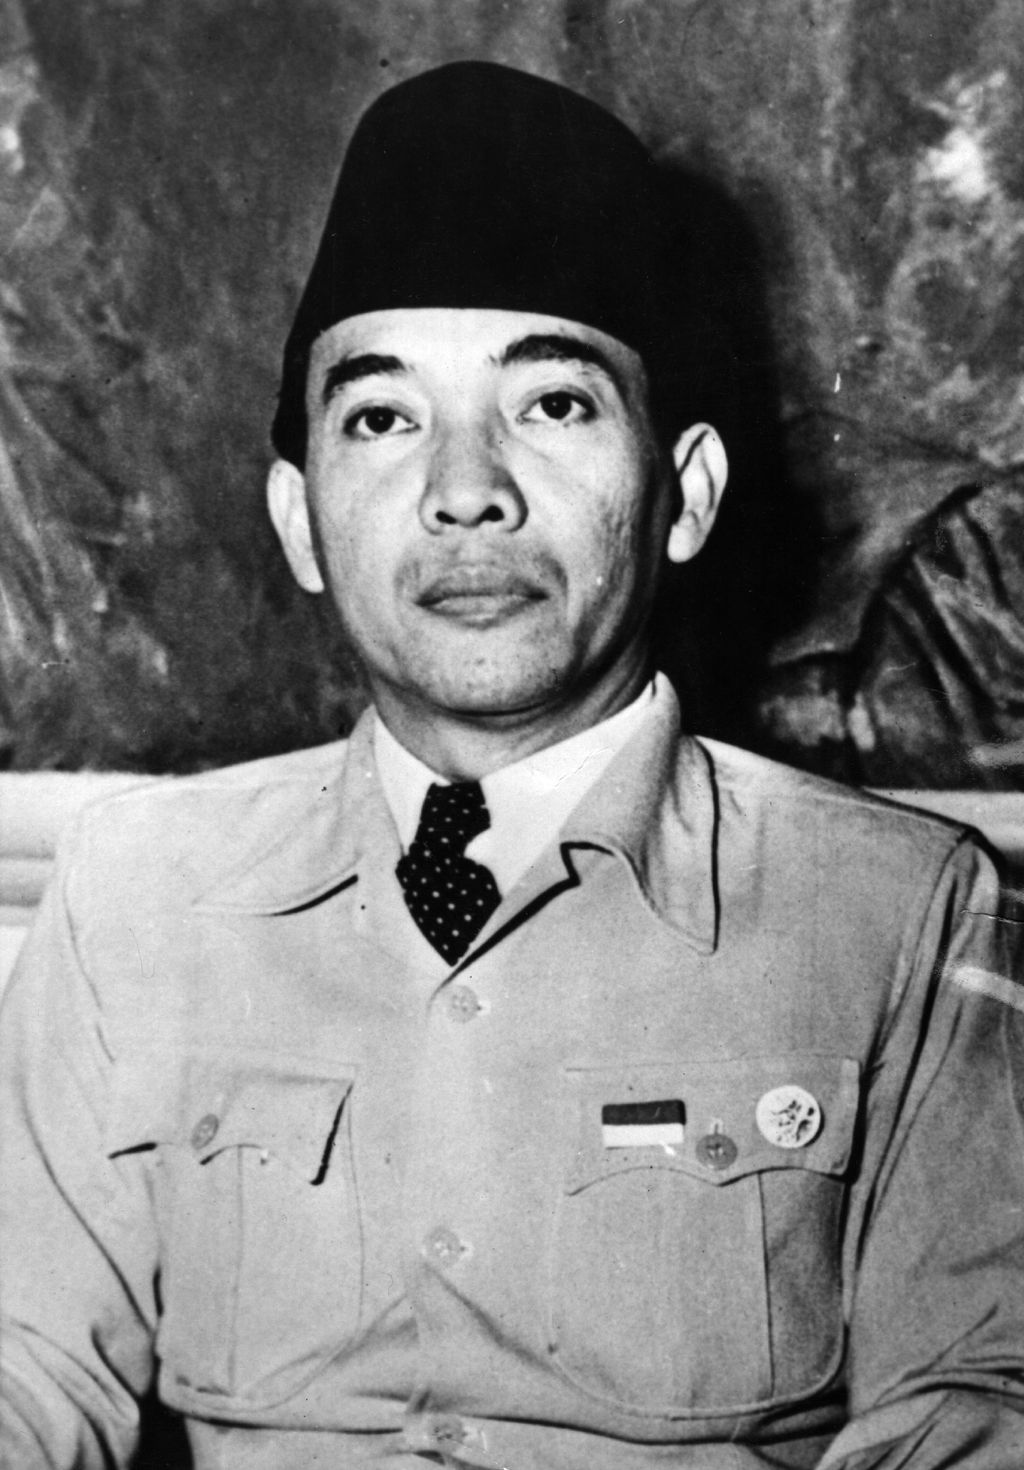 circa 1945:  Achmed Sukarno, or Soekarno, (1902 - 1970), Indonesian statesman who became Indonesia's first president in 1945.  (Photo by Keystone/Getty Images)